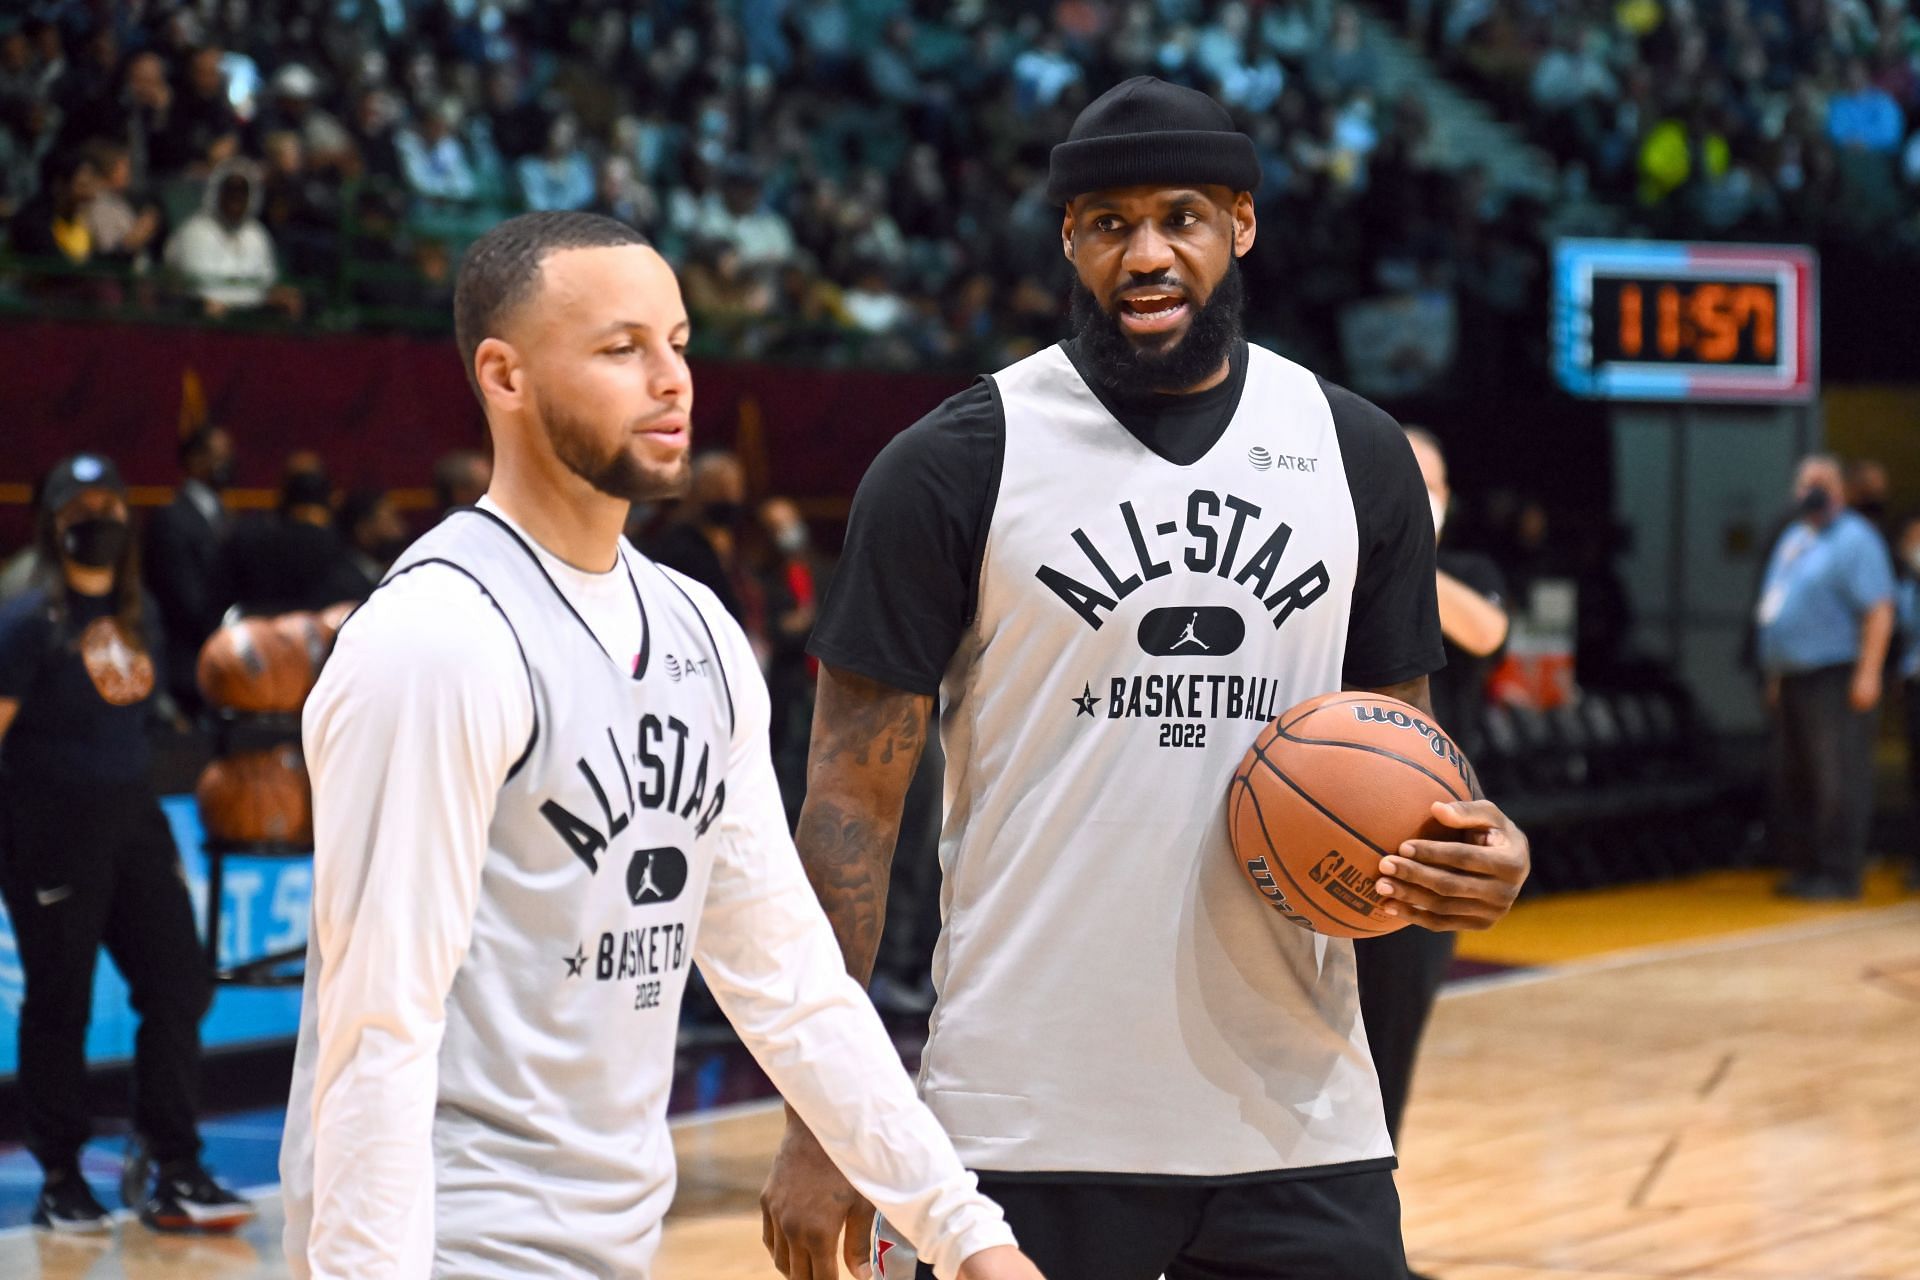 Steph Curry (left )and LeBron James at the 2022 NBA All-Star - Practice &amp; Media Availability.